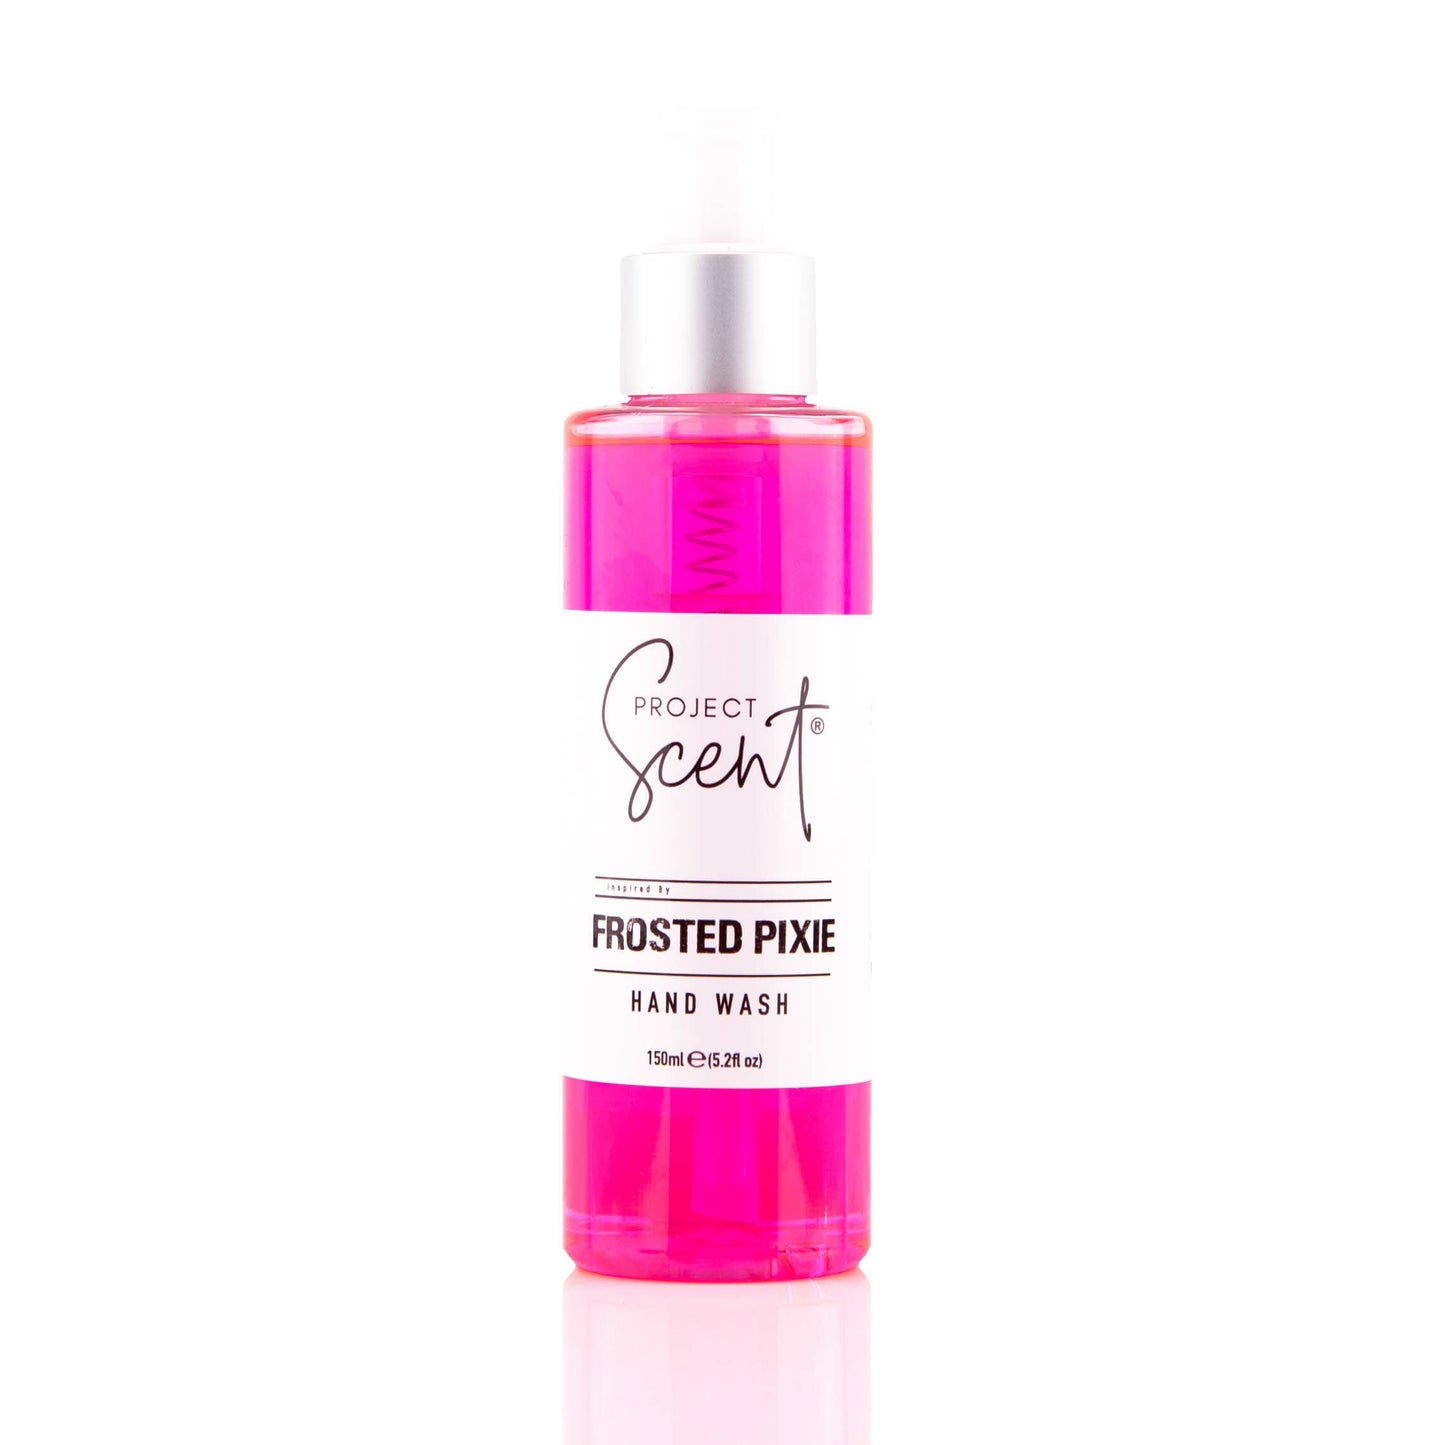 Project Scent Frosted Pixie Hand Wash 150ml